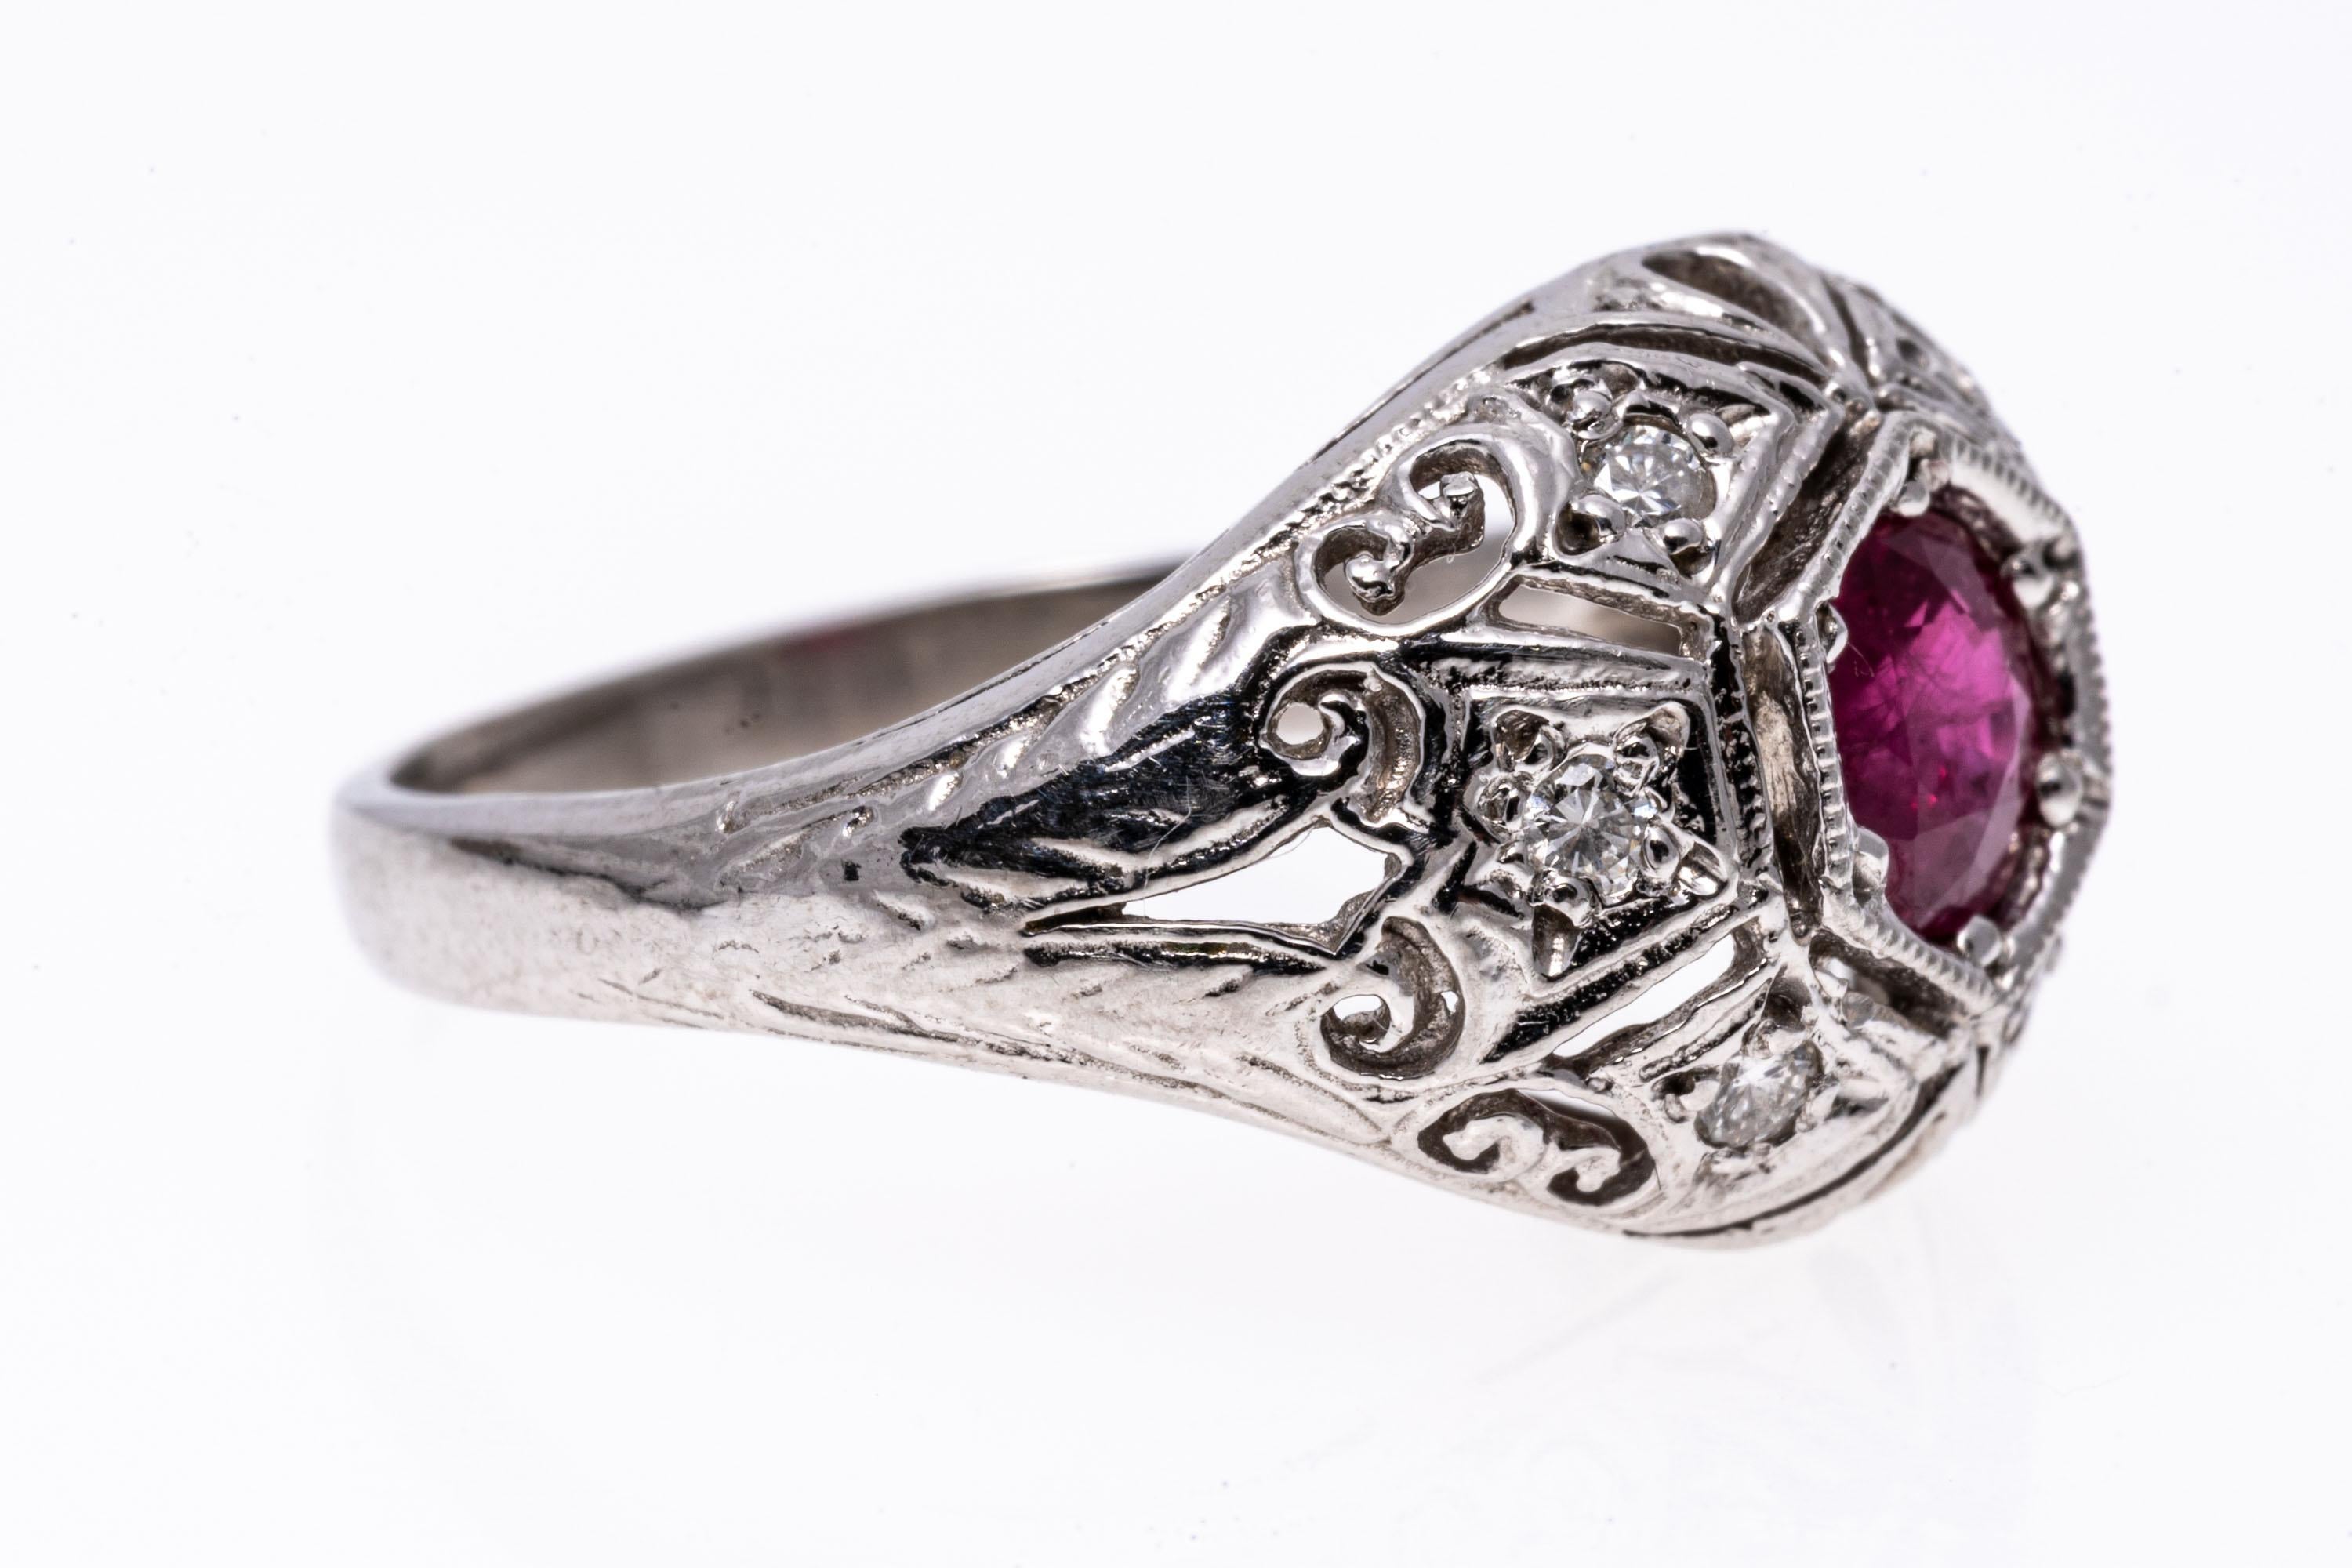 Platinum ring. This beautiful vintage platinum ring is a pierced filigree dome style, set in the center with a round faceted, dark pinkish red color ruby, approximately 0.37 CTS, accented by round faceted diamonds, approximately 0.06 TCW.
Marks: